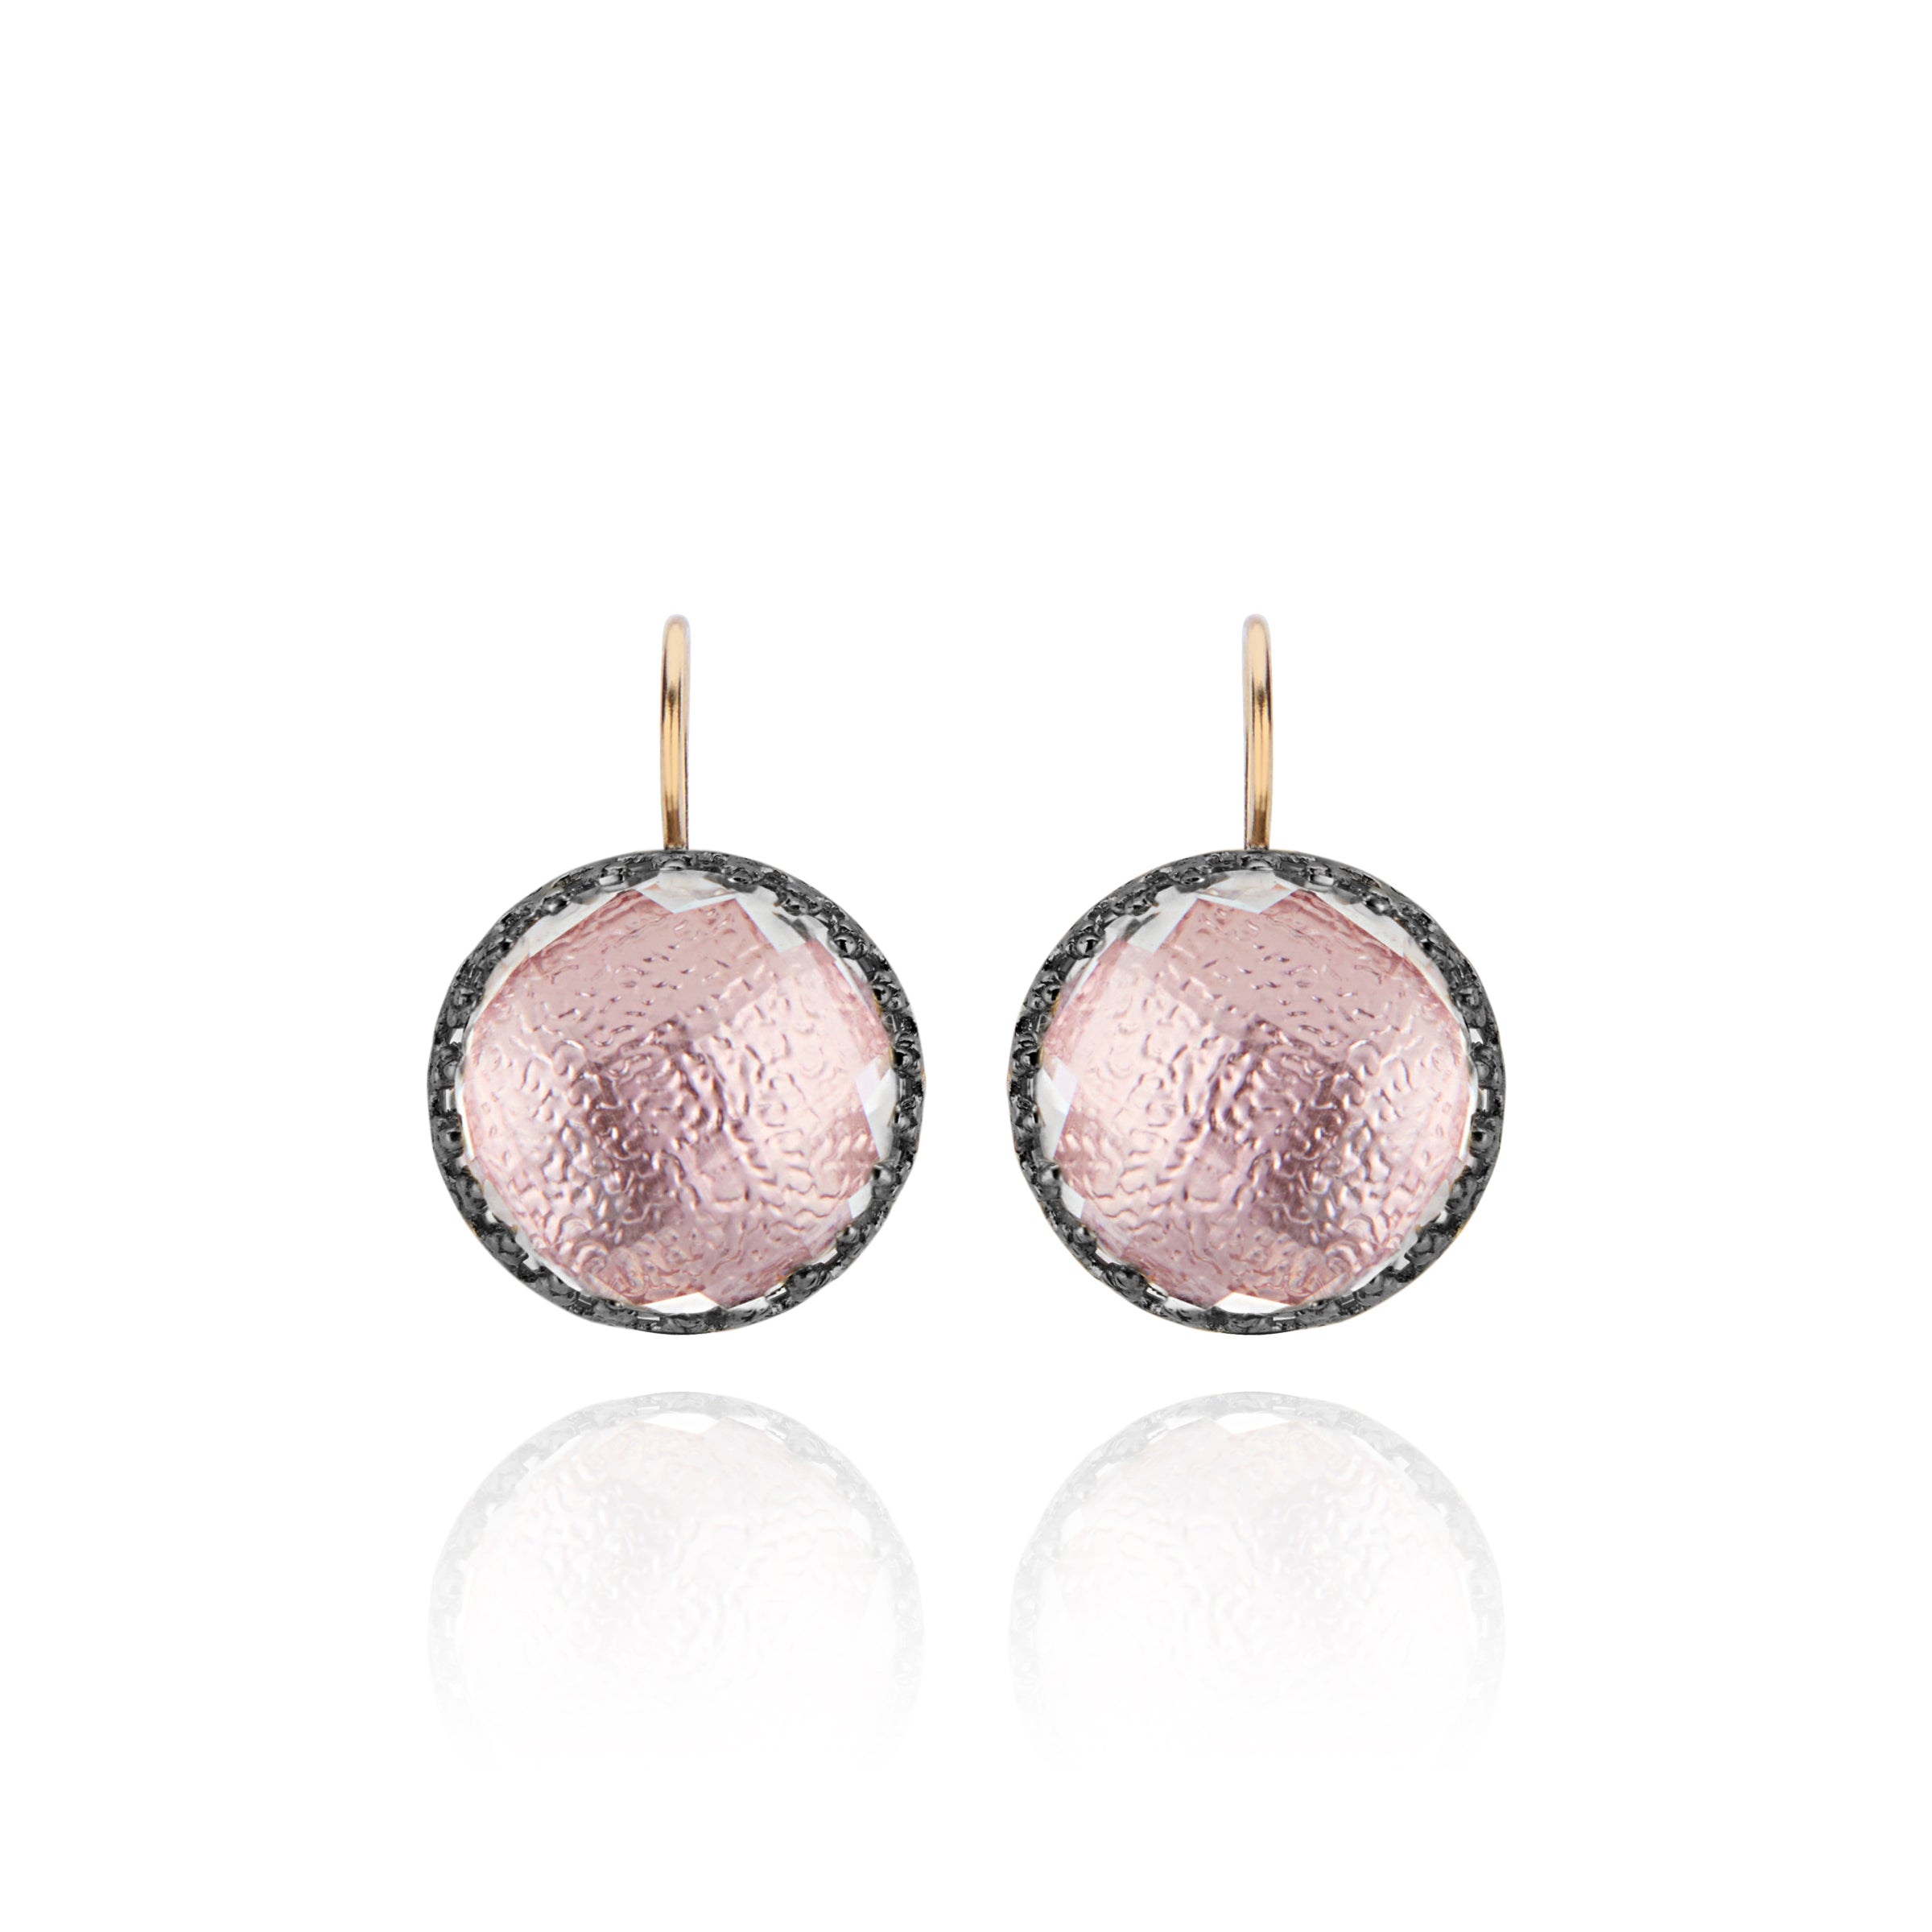 Olivia Button Earrings (Black Rhodium, Yellow, or Rose Gold Wash)